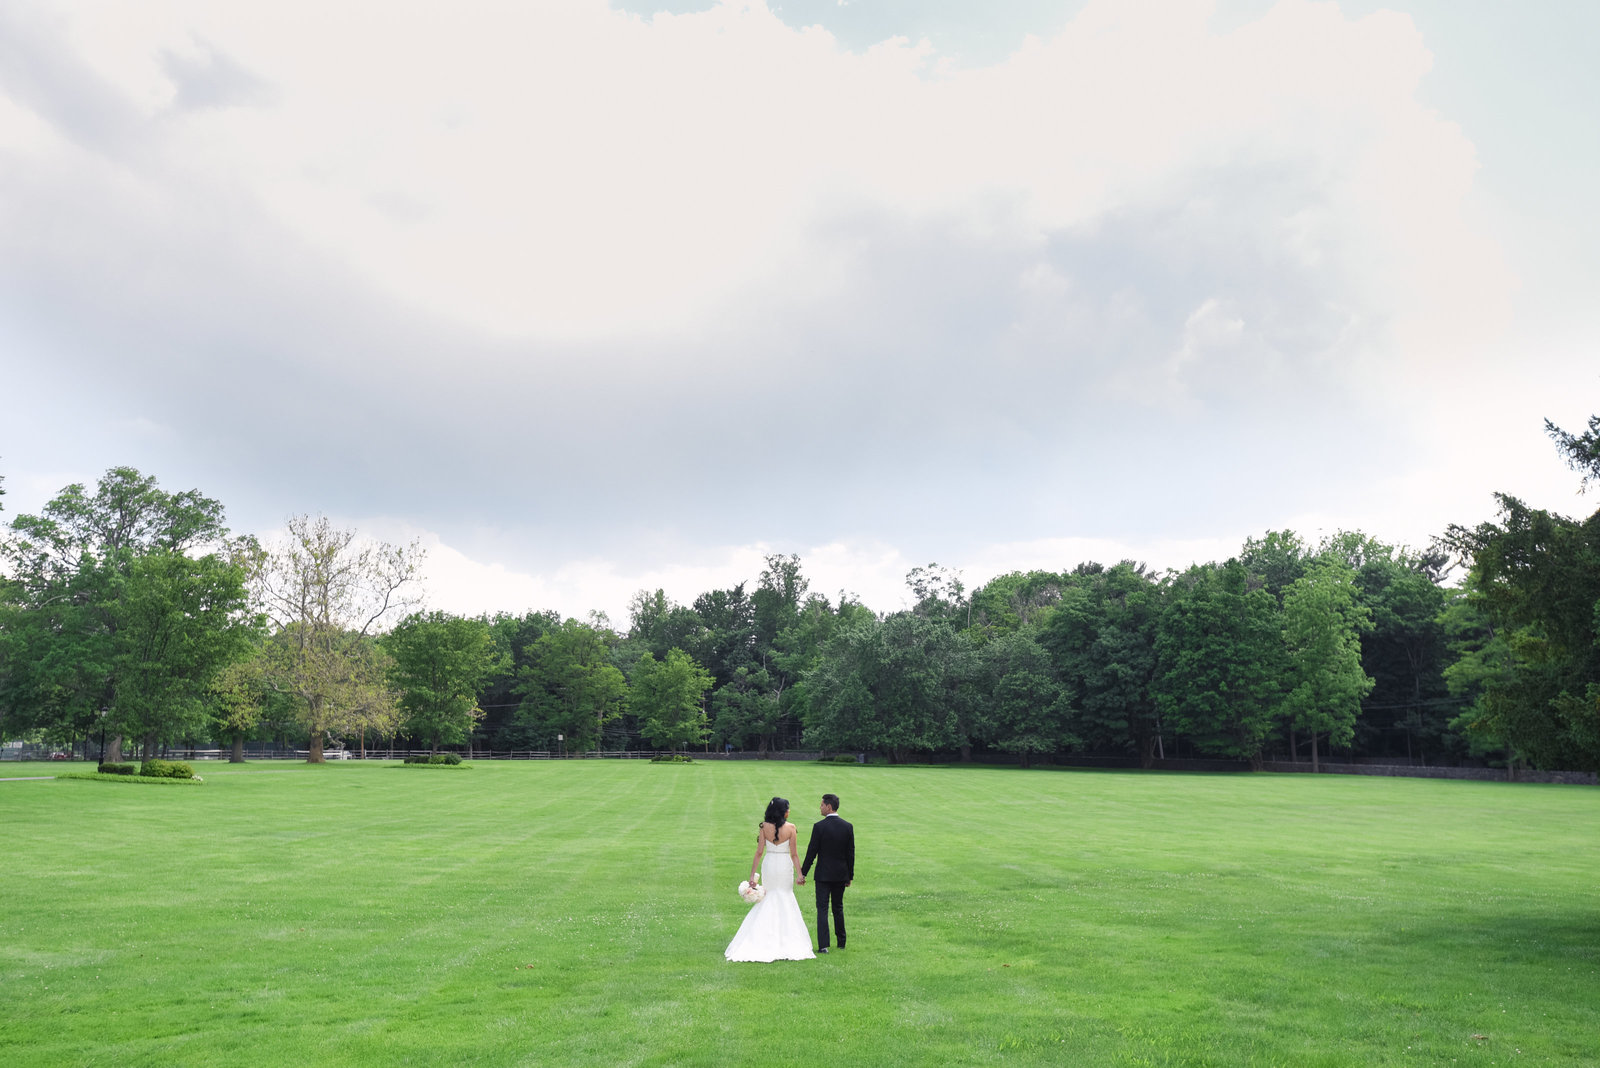 Bride and groom walking at the grounds of Glen Cove Mansion